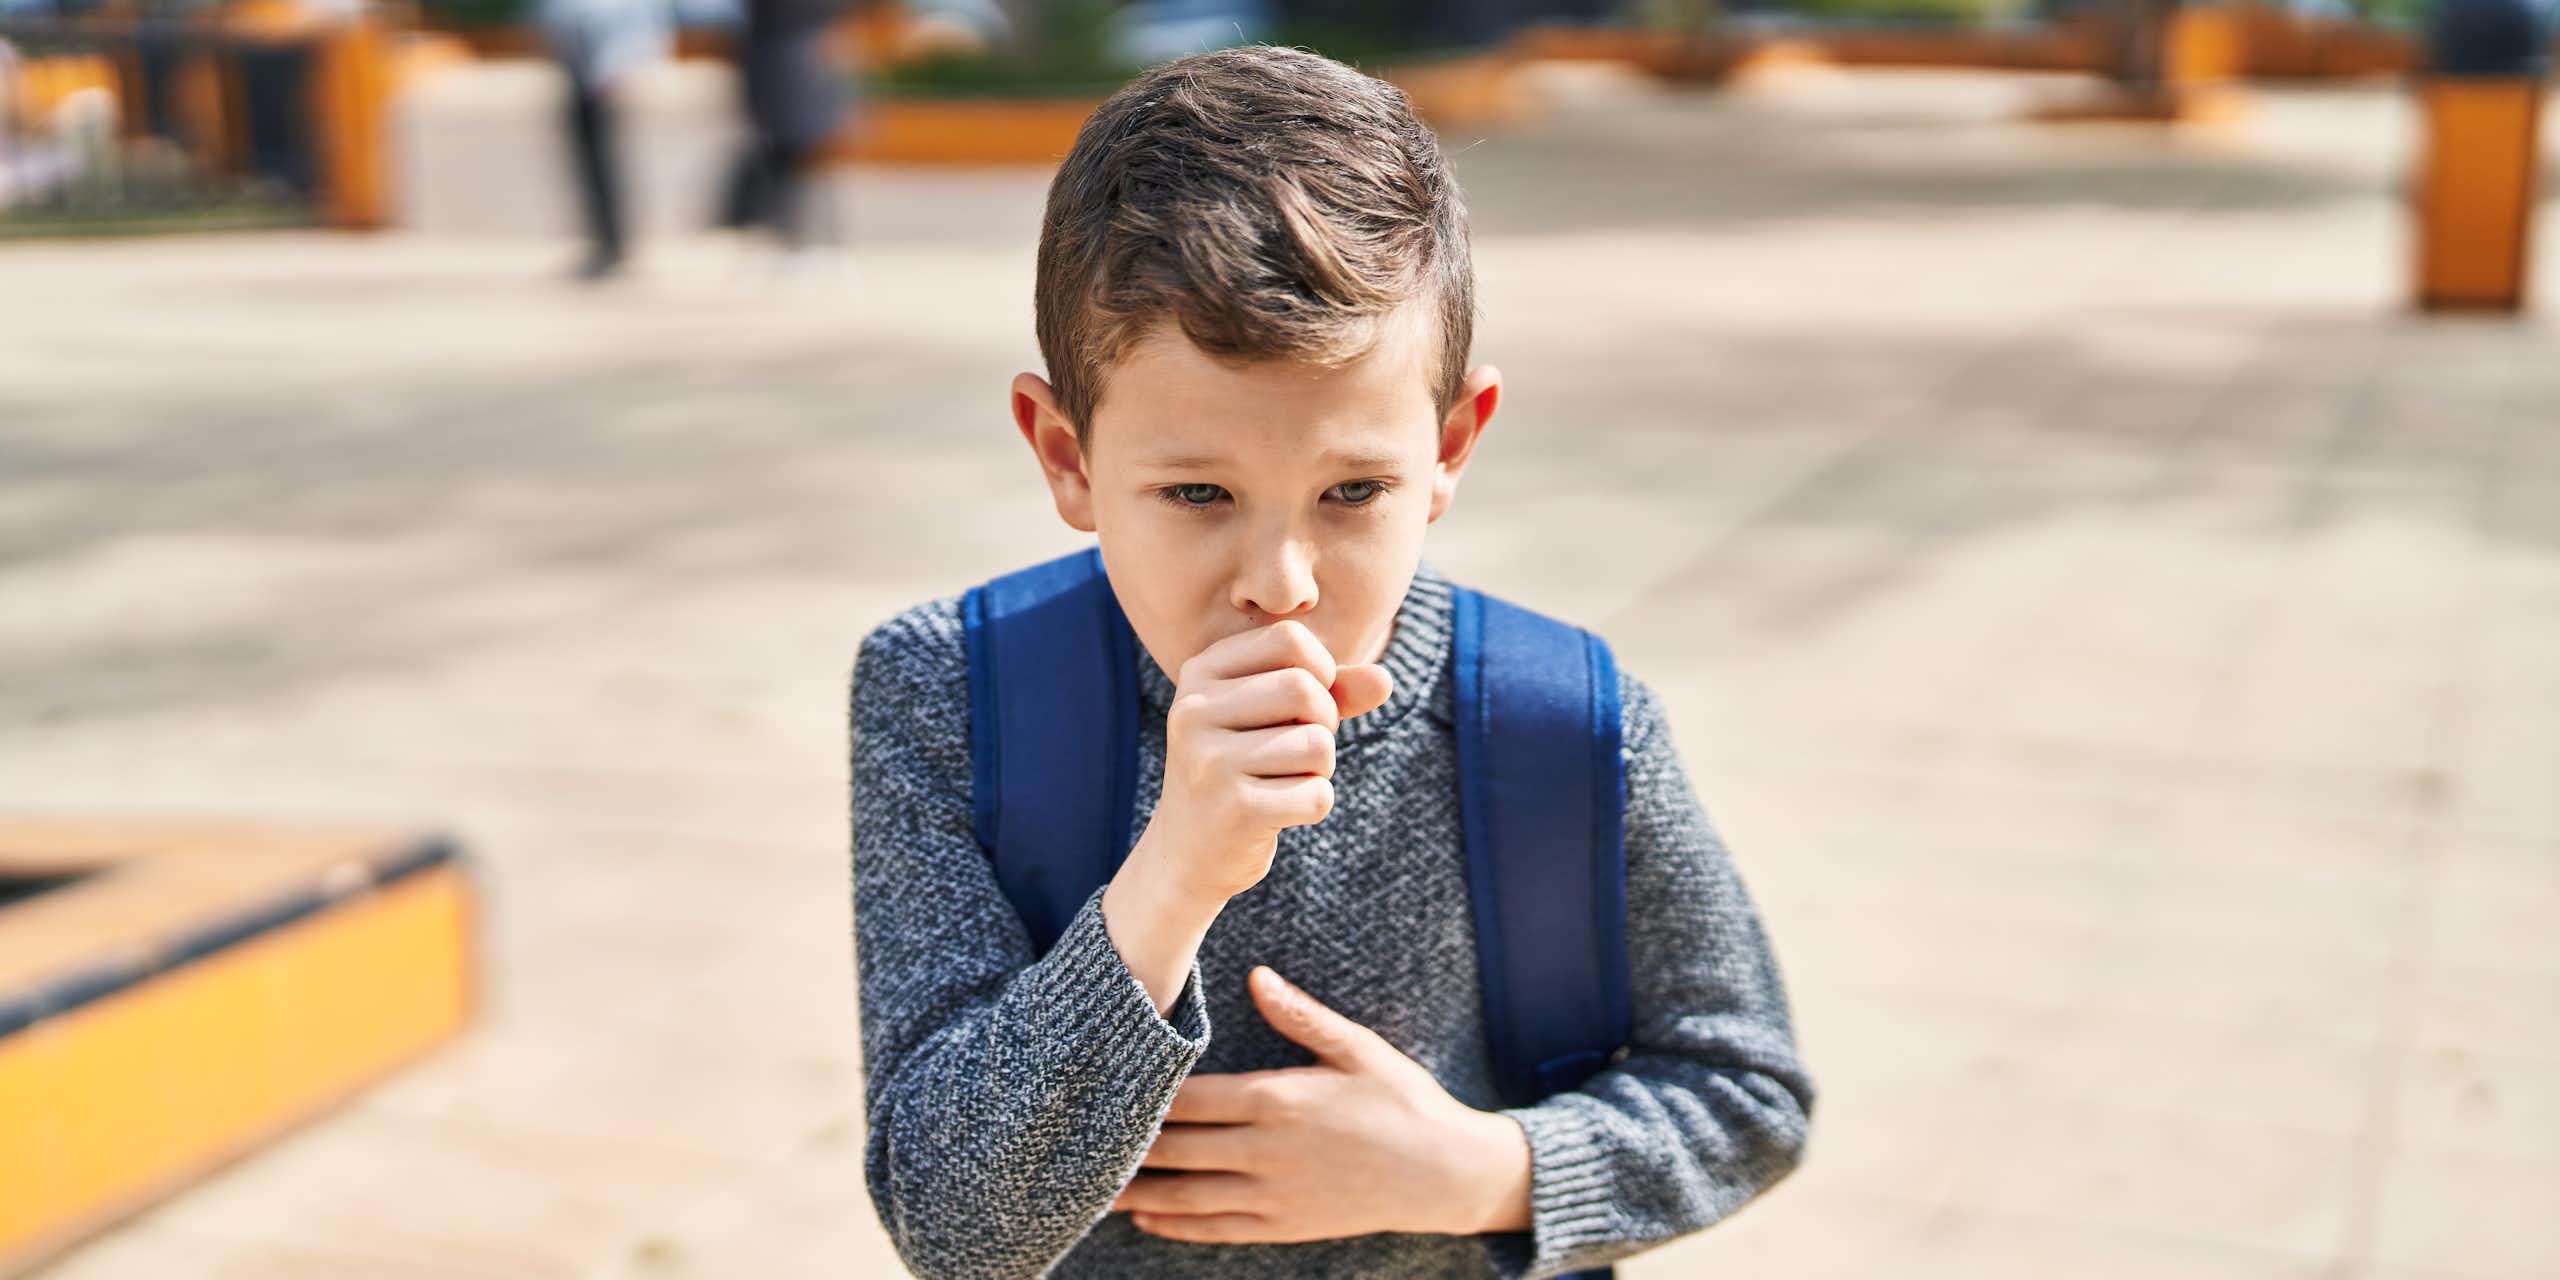 A child wearing a backpack coughs into his closed fist.